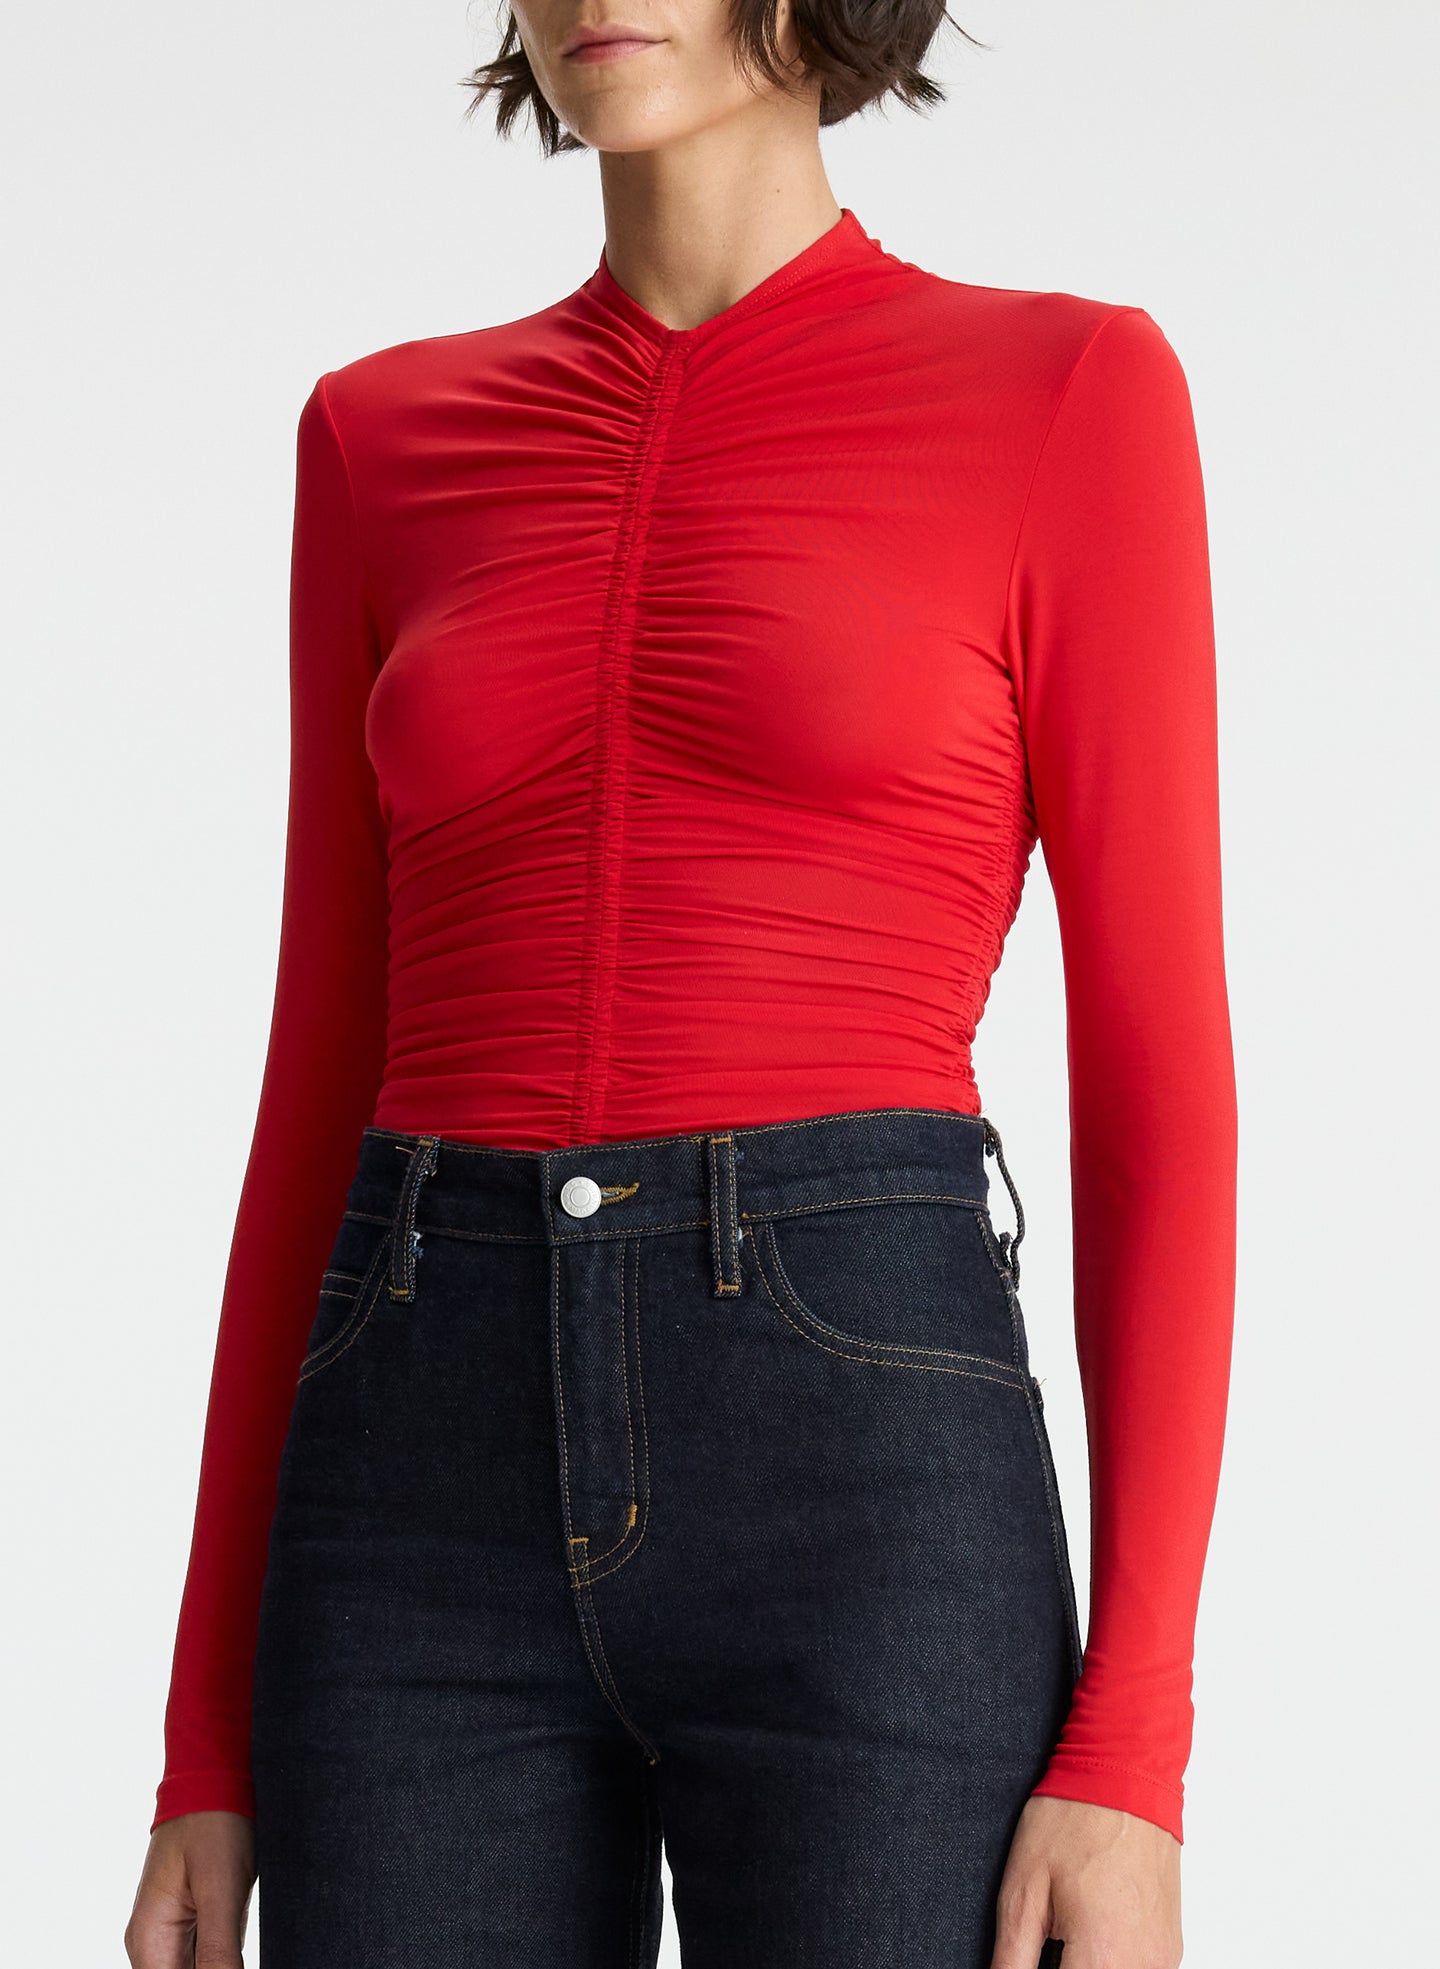 detail view of woman wearing red ruched long sleeve top and dark wash jeans